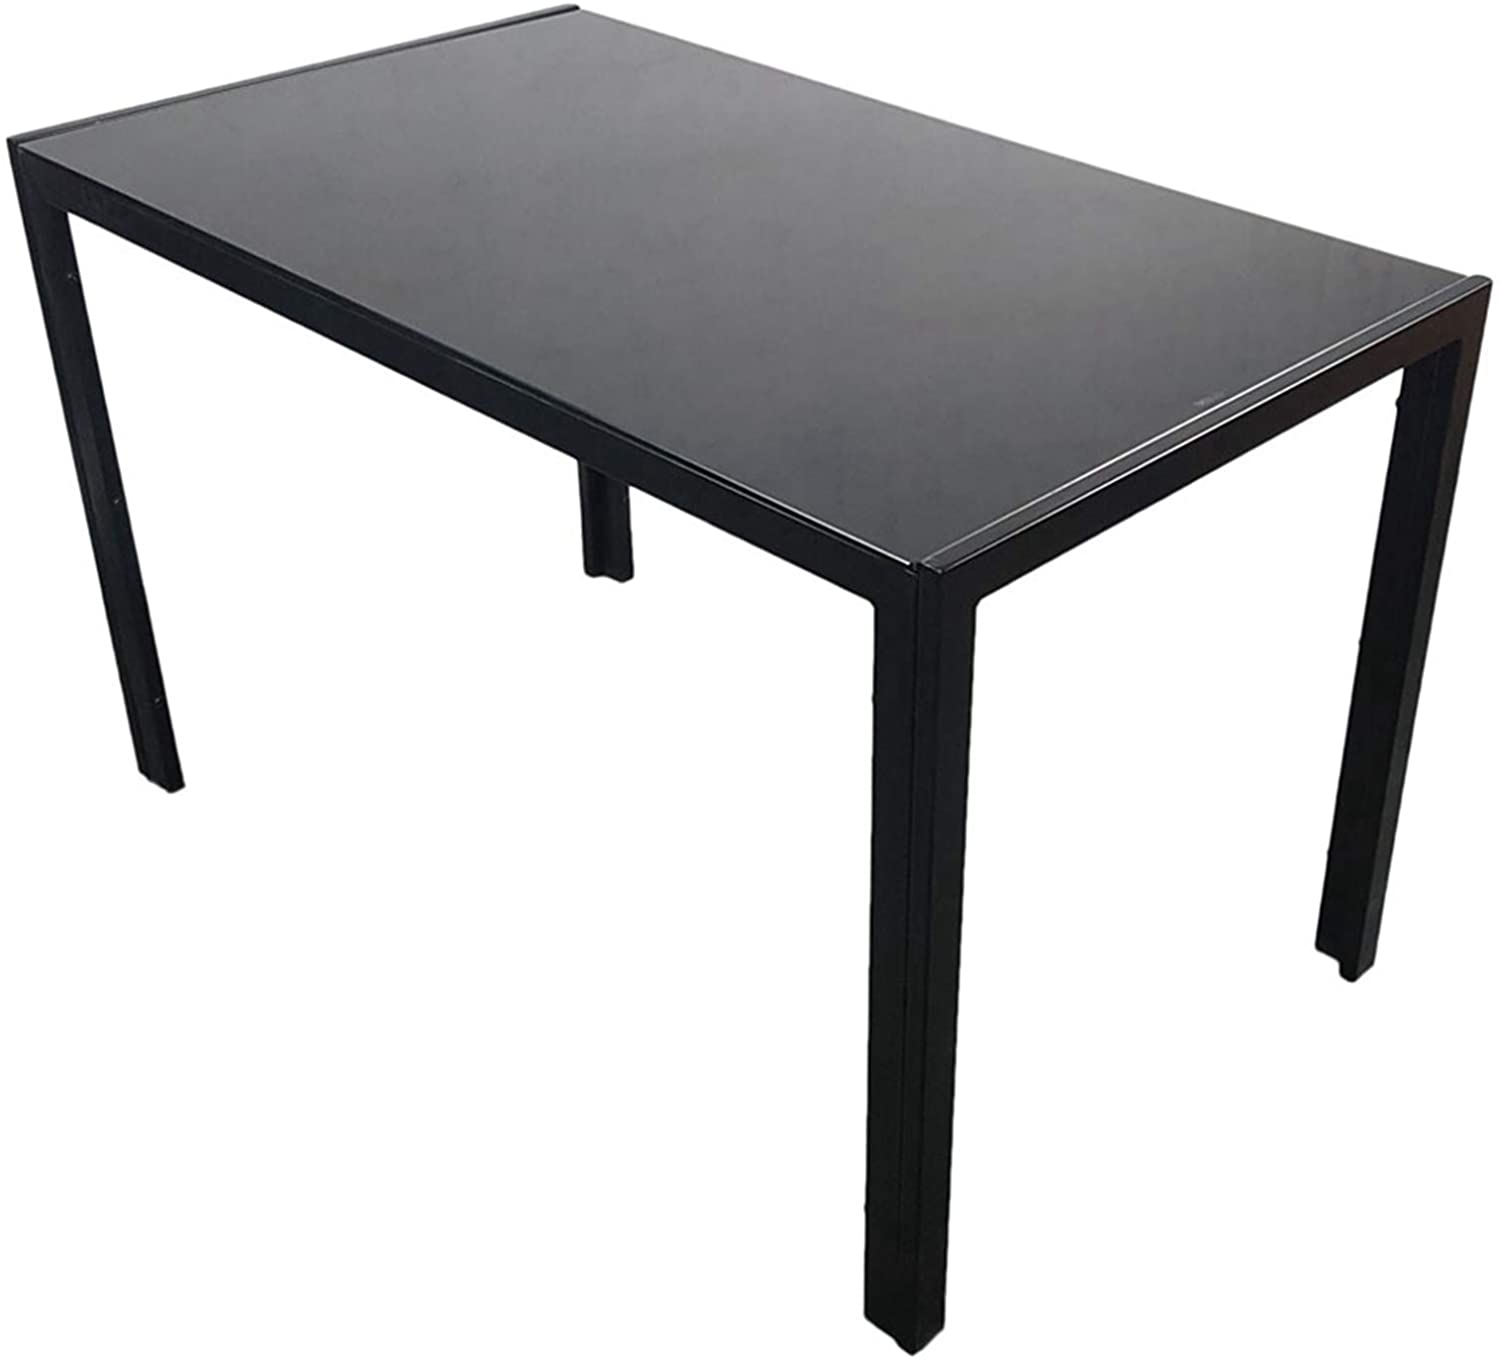 B08LNVGBHK Simple Assembled Tempered Glass & Iron Dinner Table Black Fancy Dining Table Dining Tables Dining Room Table for Small Spaces Kitchen Modern Table for Home Furniture